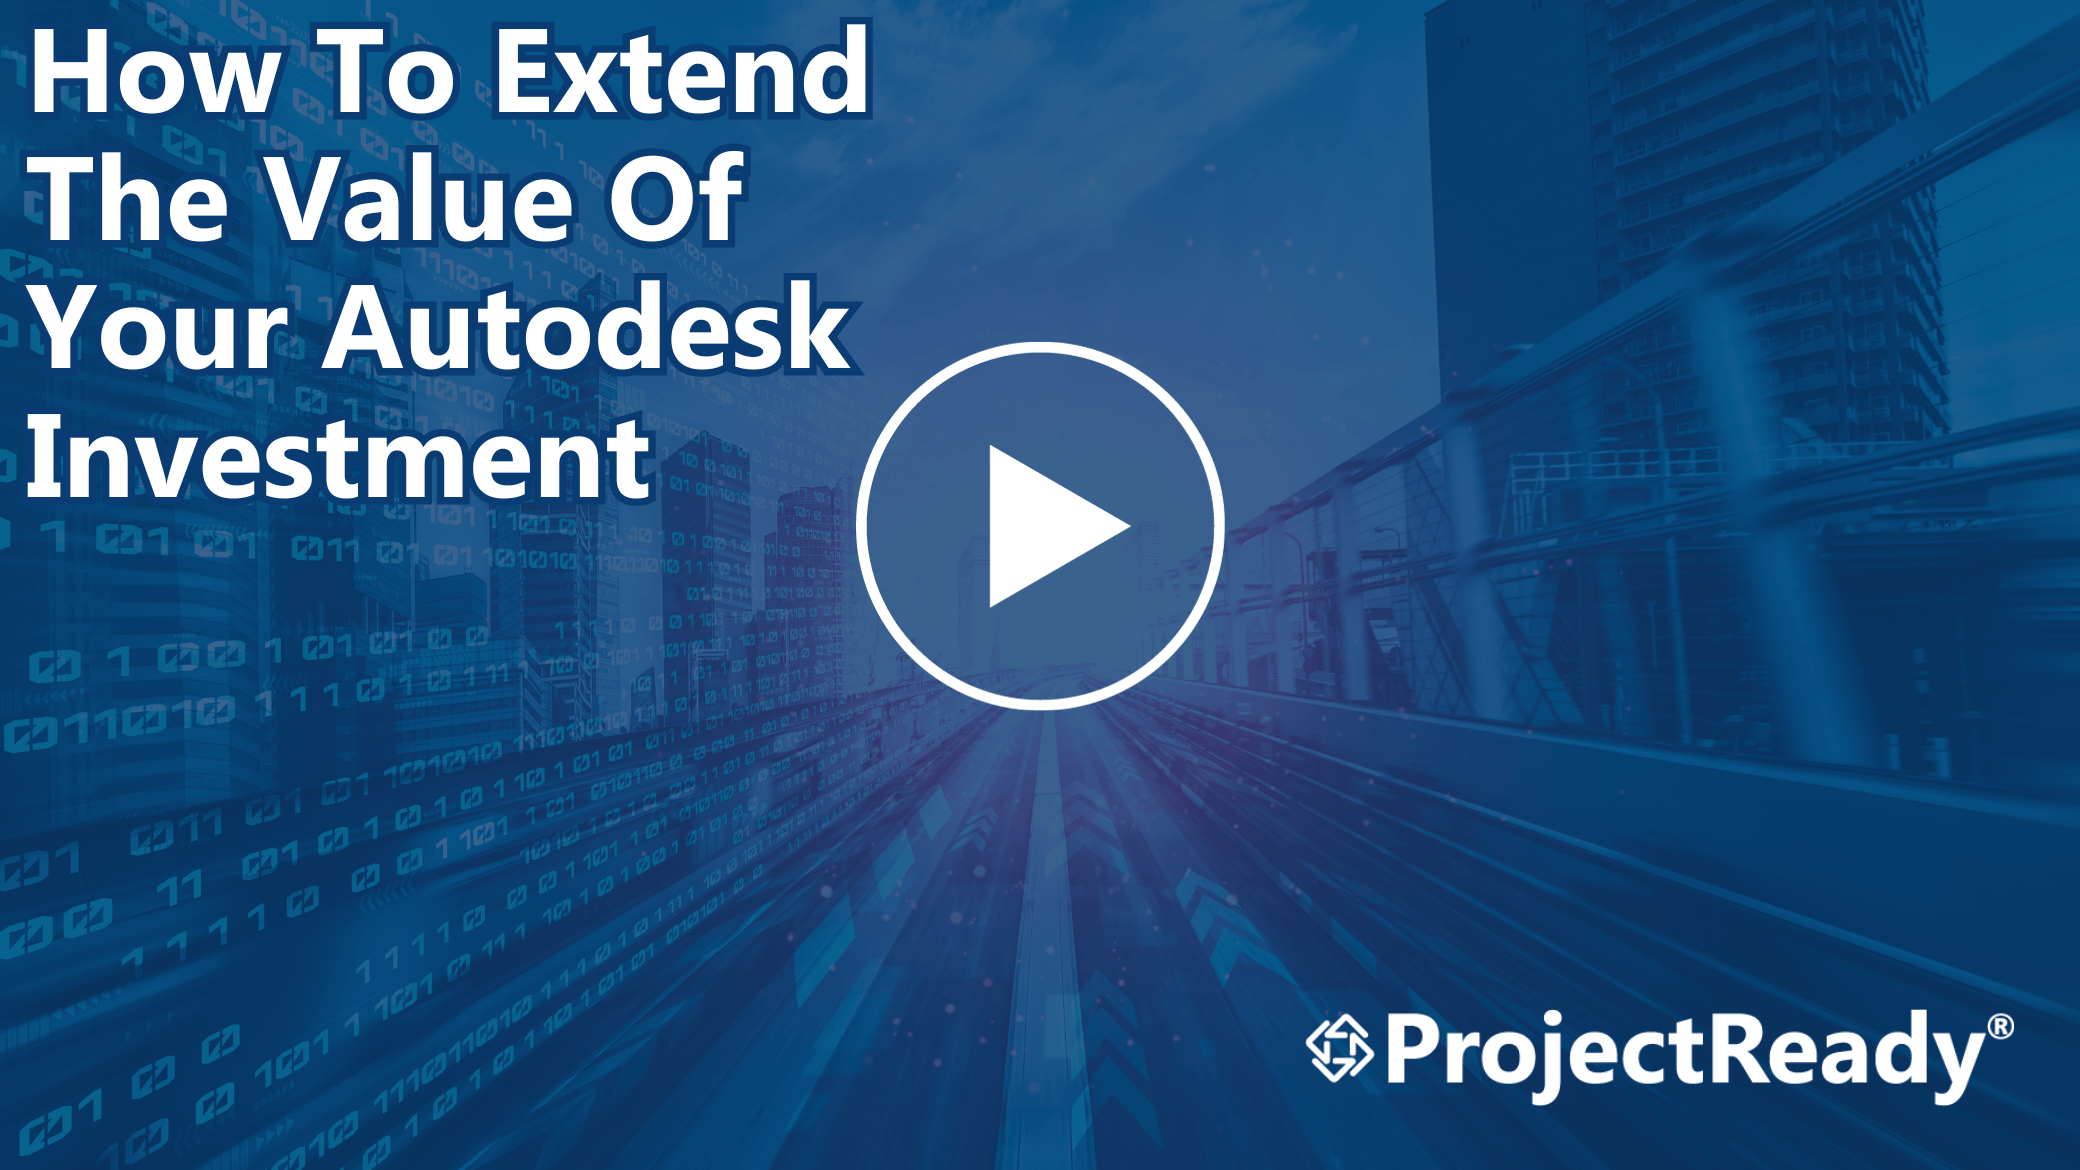 Extend the Value of Autodesk | ProjectReady